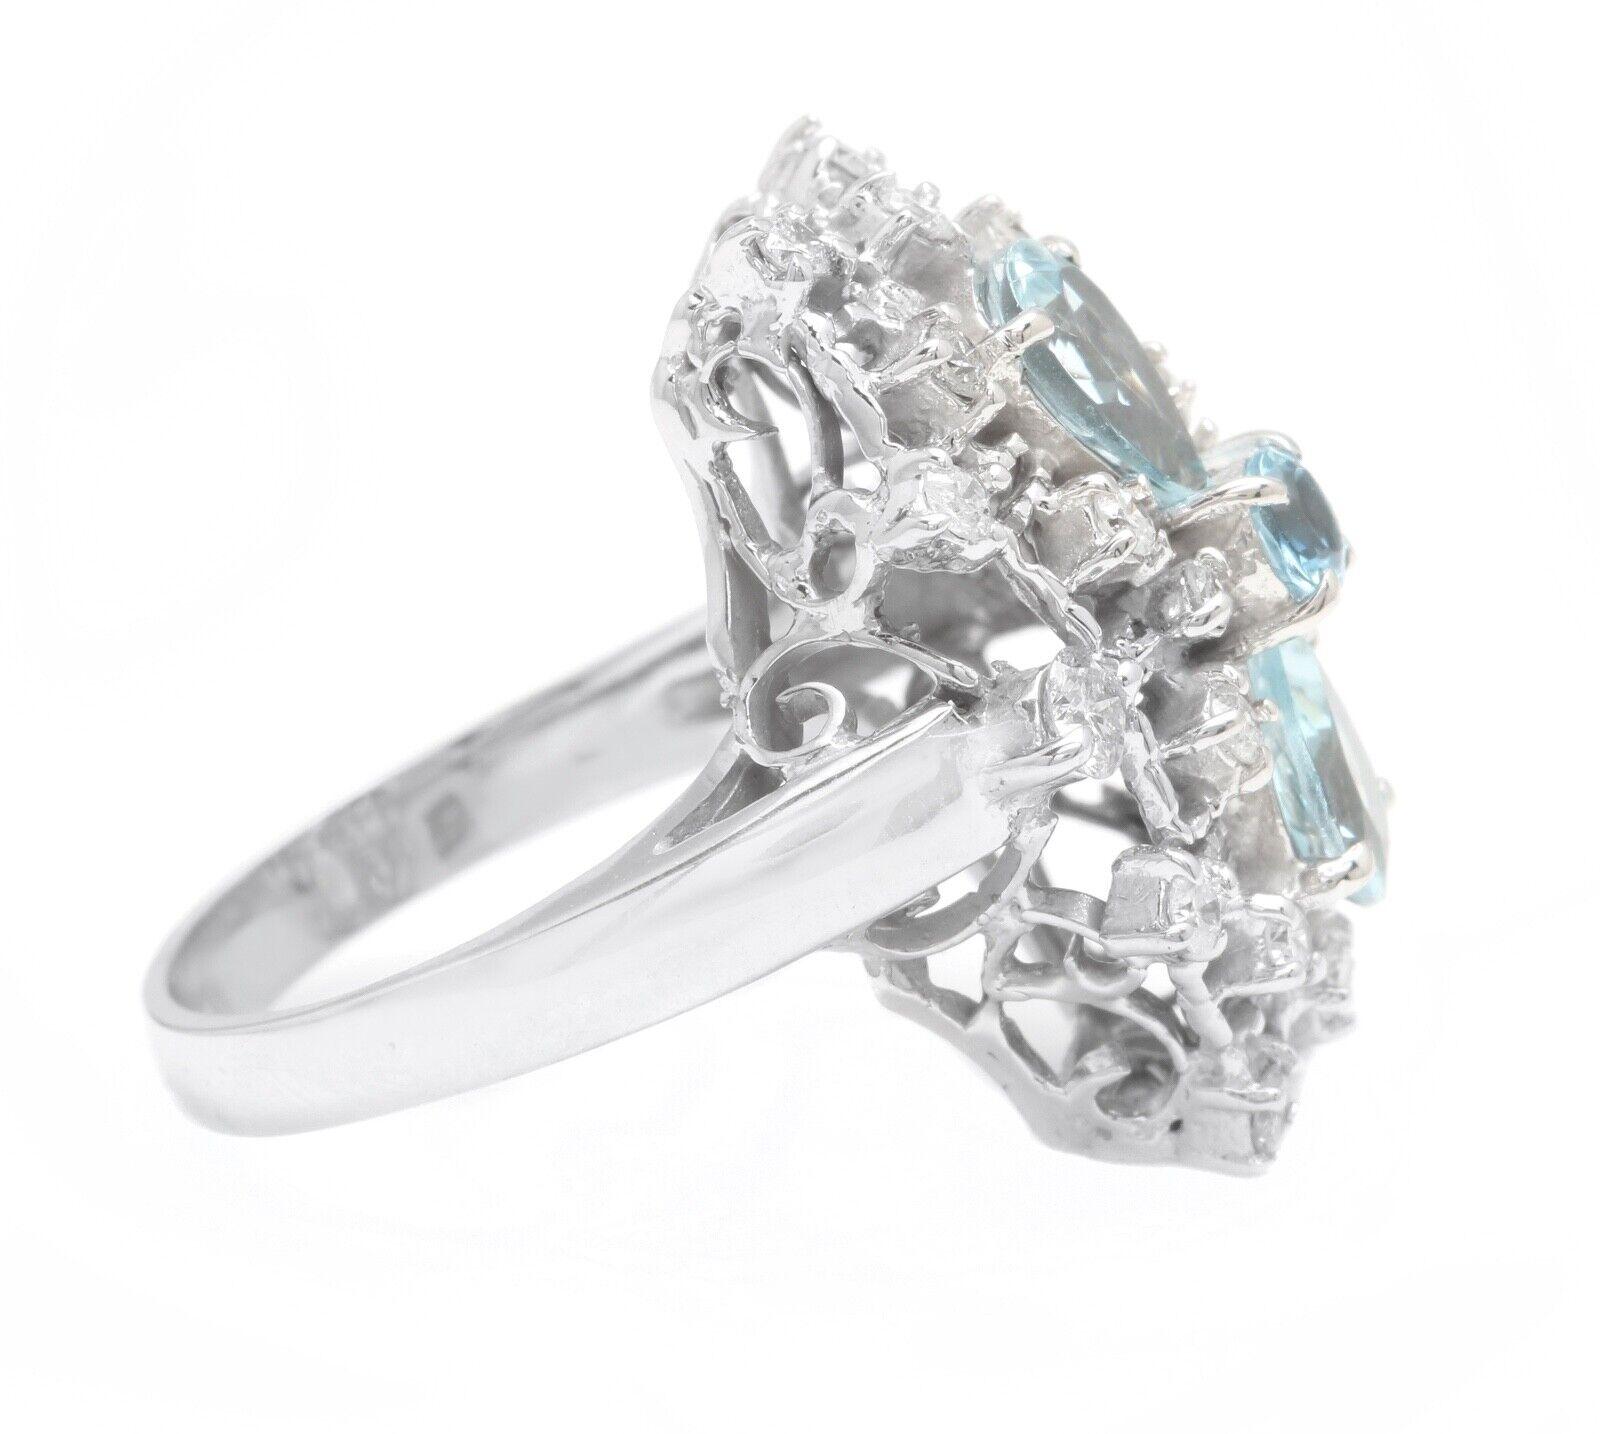 Mixed Cut 1.75Ct Natural Aquamarine and Diamond 14K Solid White Gold Ring For Sale